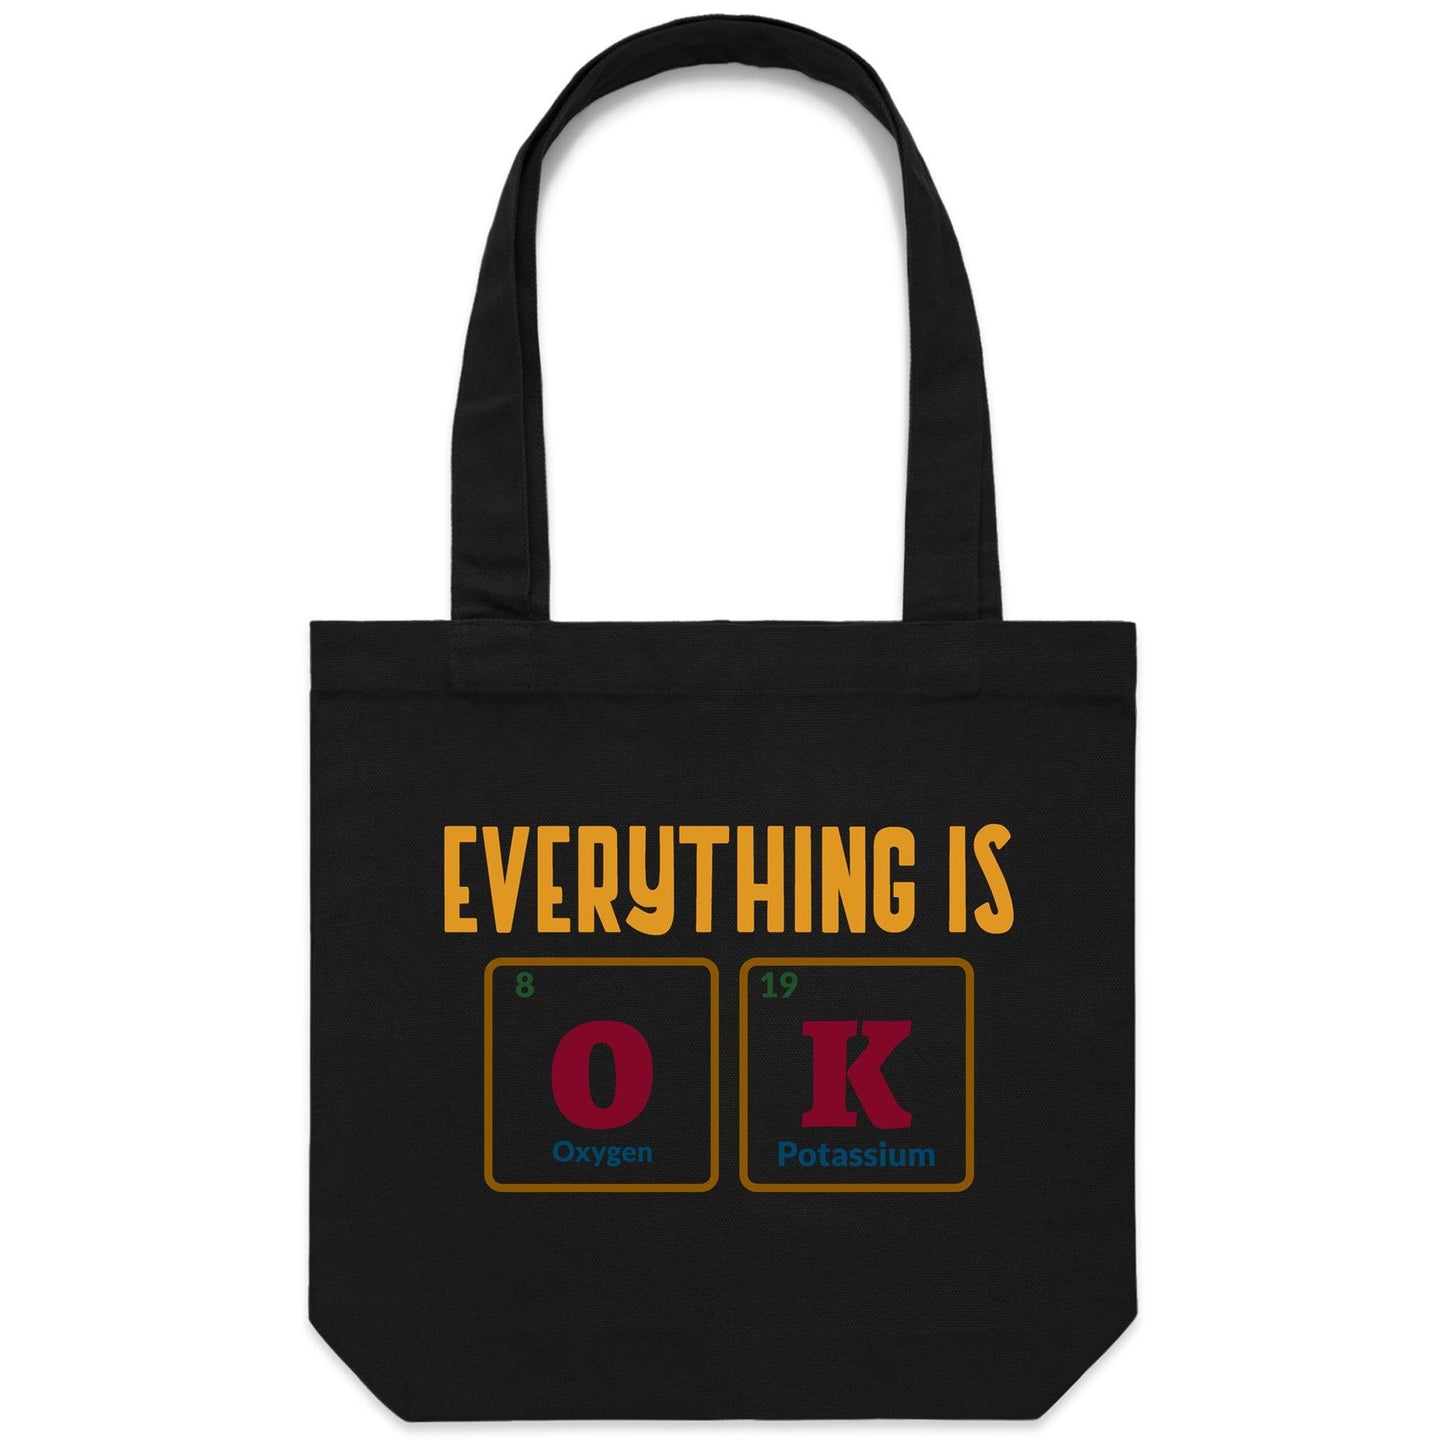 Everything Is OK, Periodic Table Of Elements - Canvas Tote Bag Black One Size Tote Bag Science